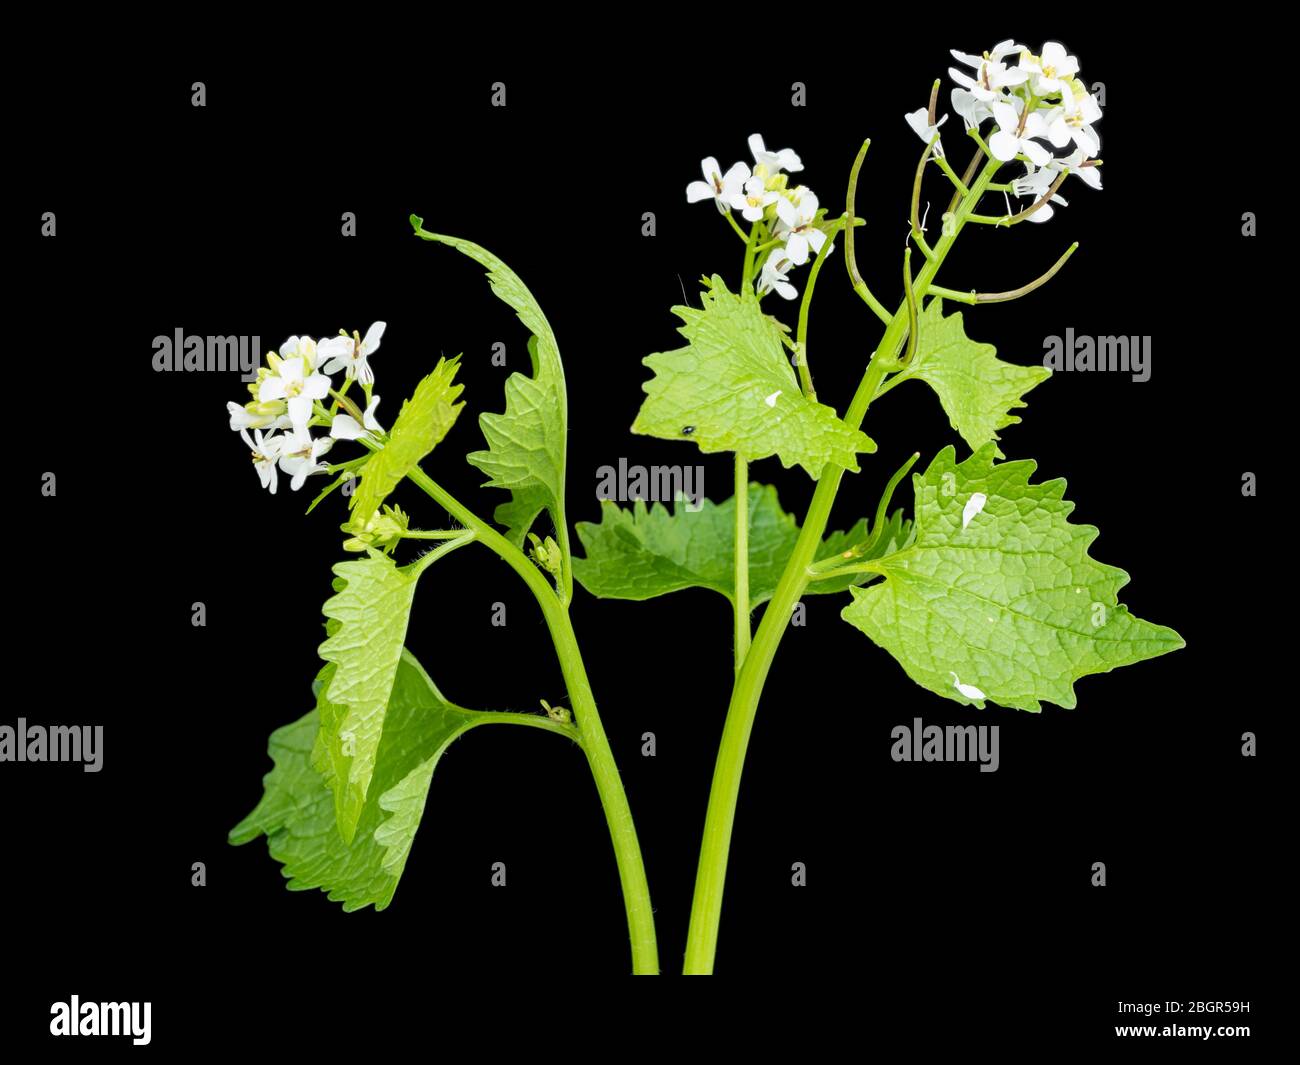 UK wildflower, Jack by the hedge or garlic mustard, Alliaria petiolata, flowering against a black background Stock Photo